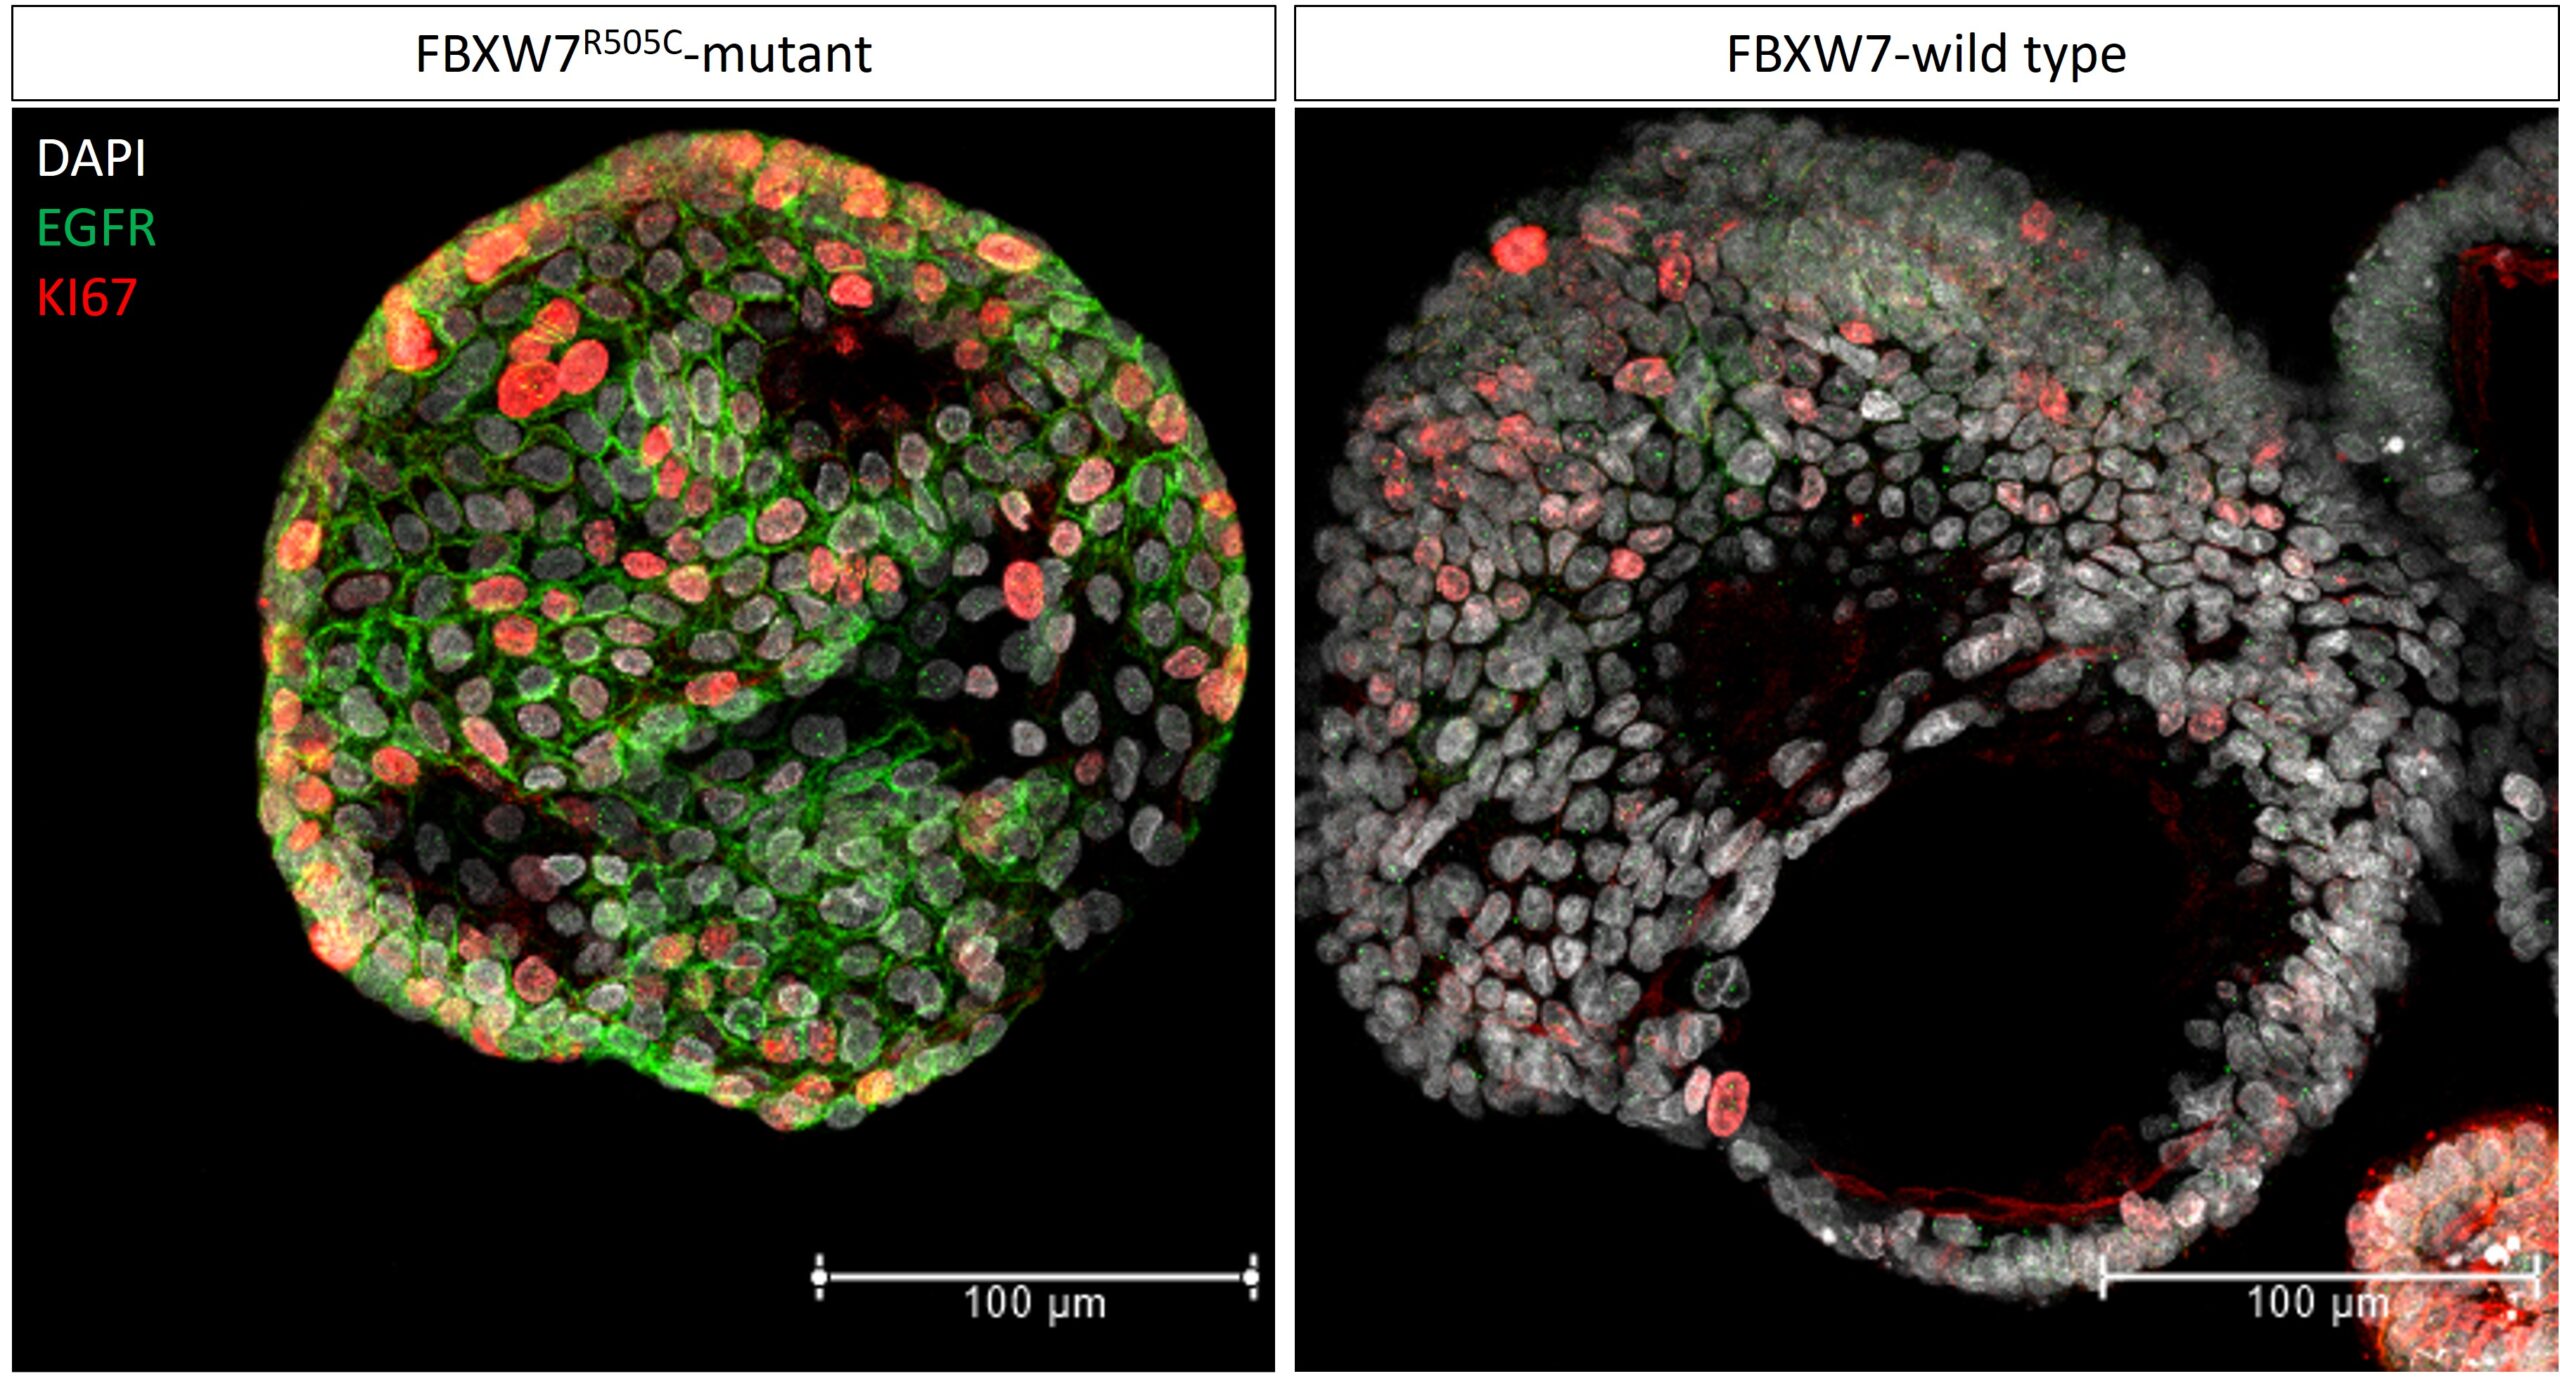 Microscopy images of intestinal organoids showing more EGFR signaling activity in the organoid with the FBXW7 mutation.